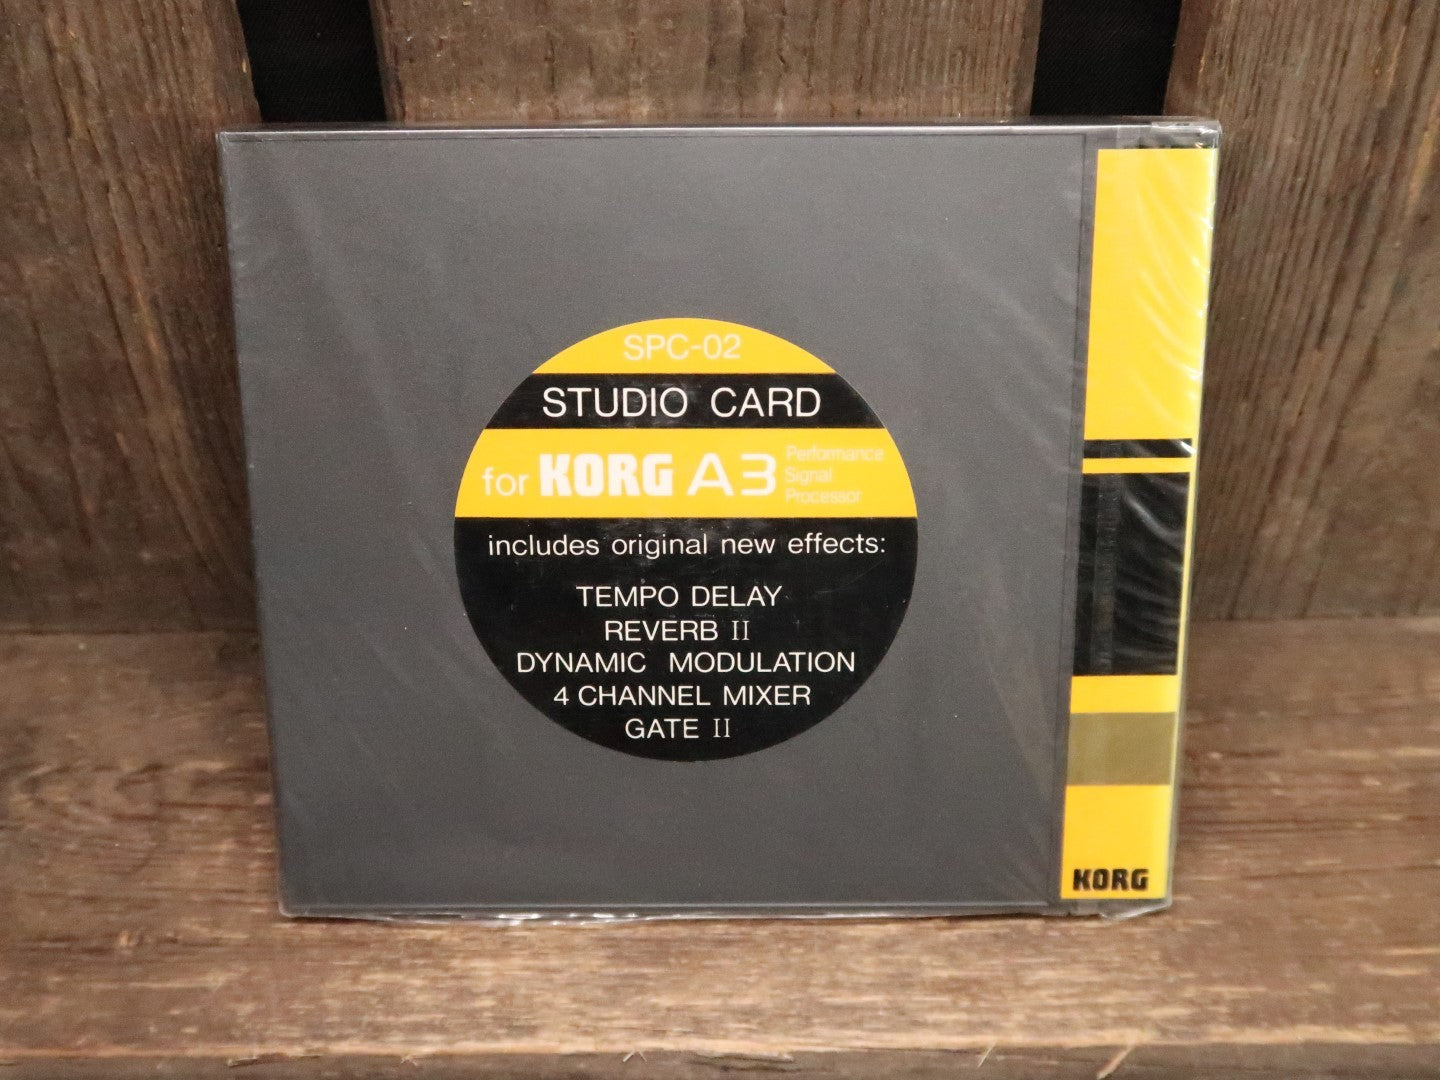 Korg A2 / A3 SPC-02 Studio Card (New Old Stock)